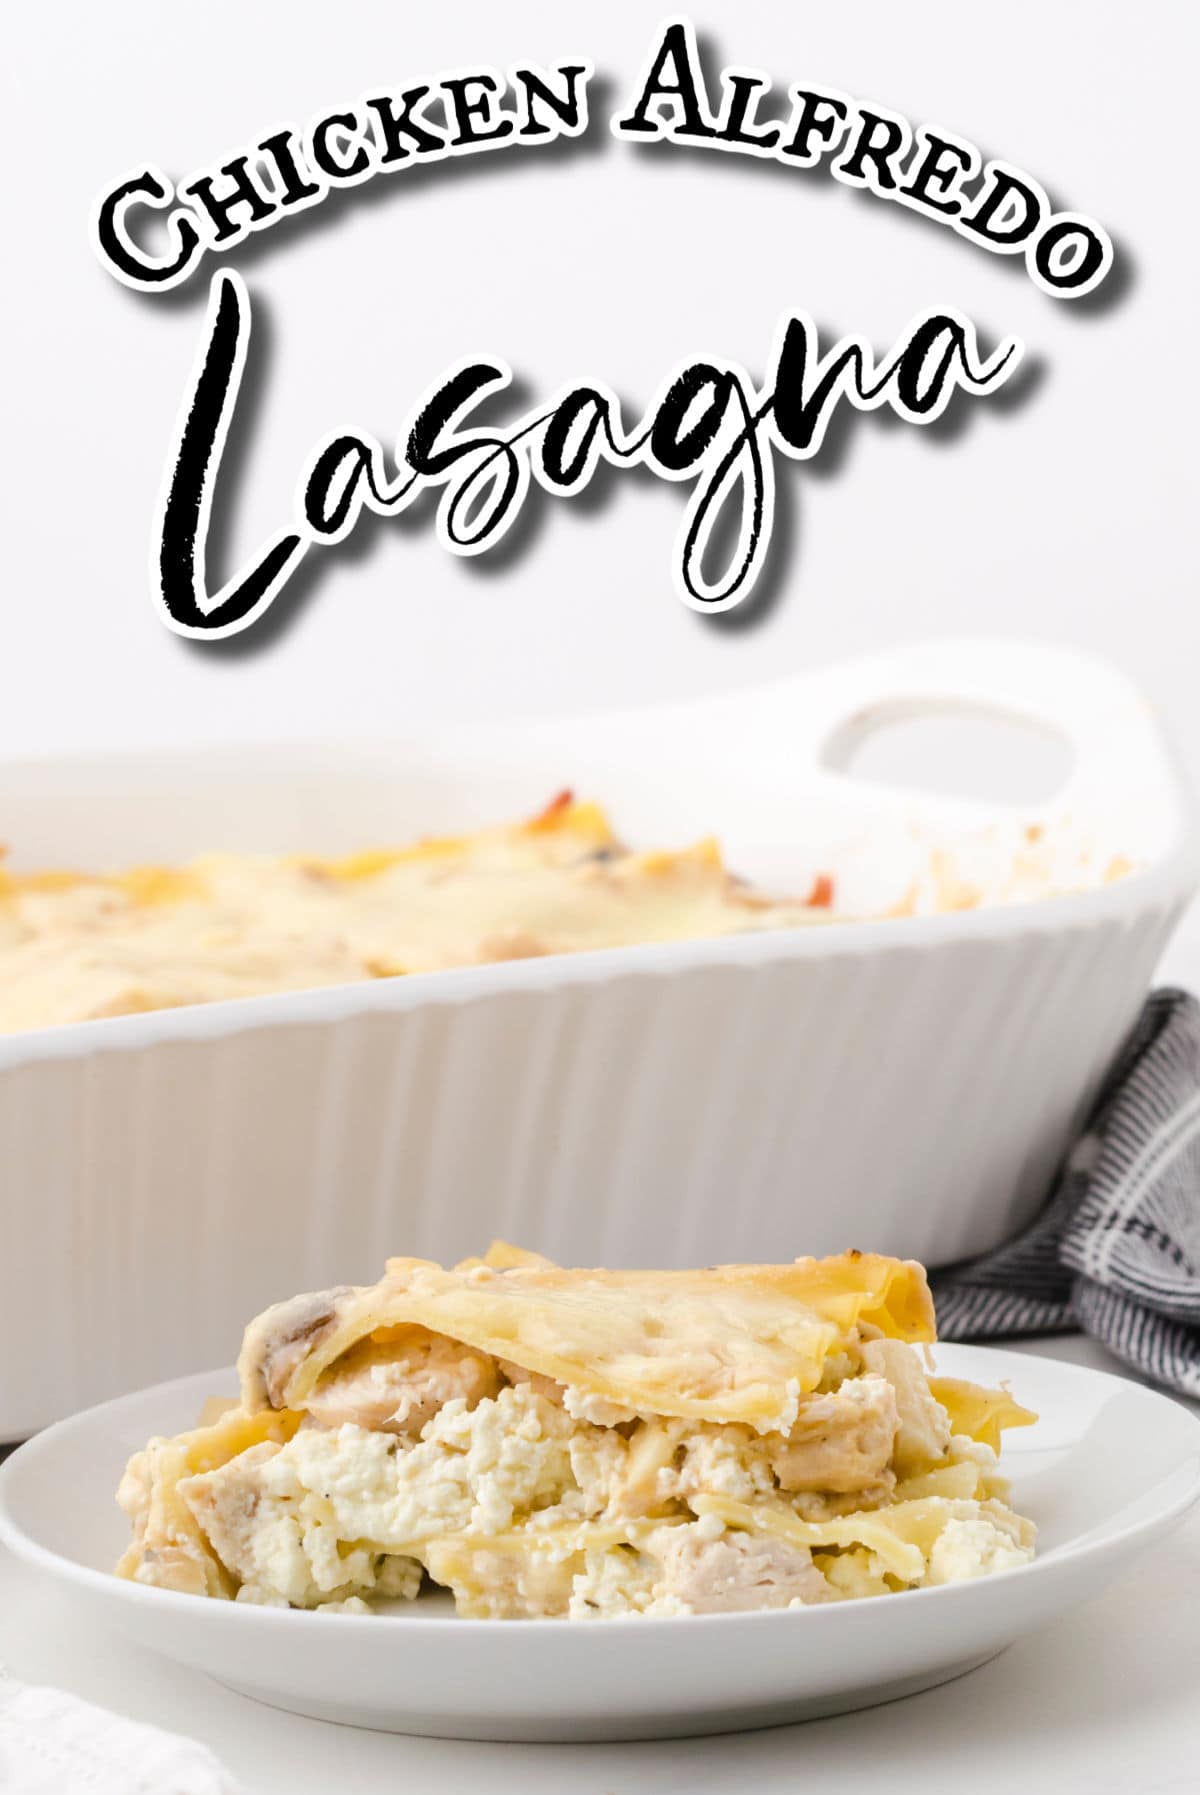 Title image for Chicken Alfredo Lasagna with text overlay.